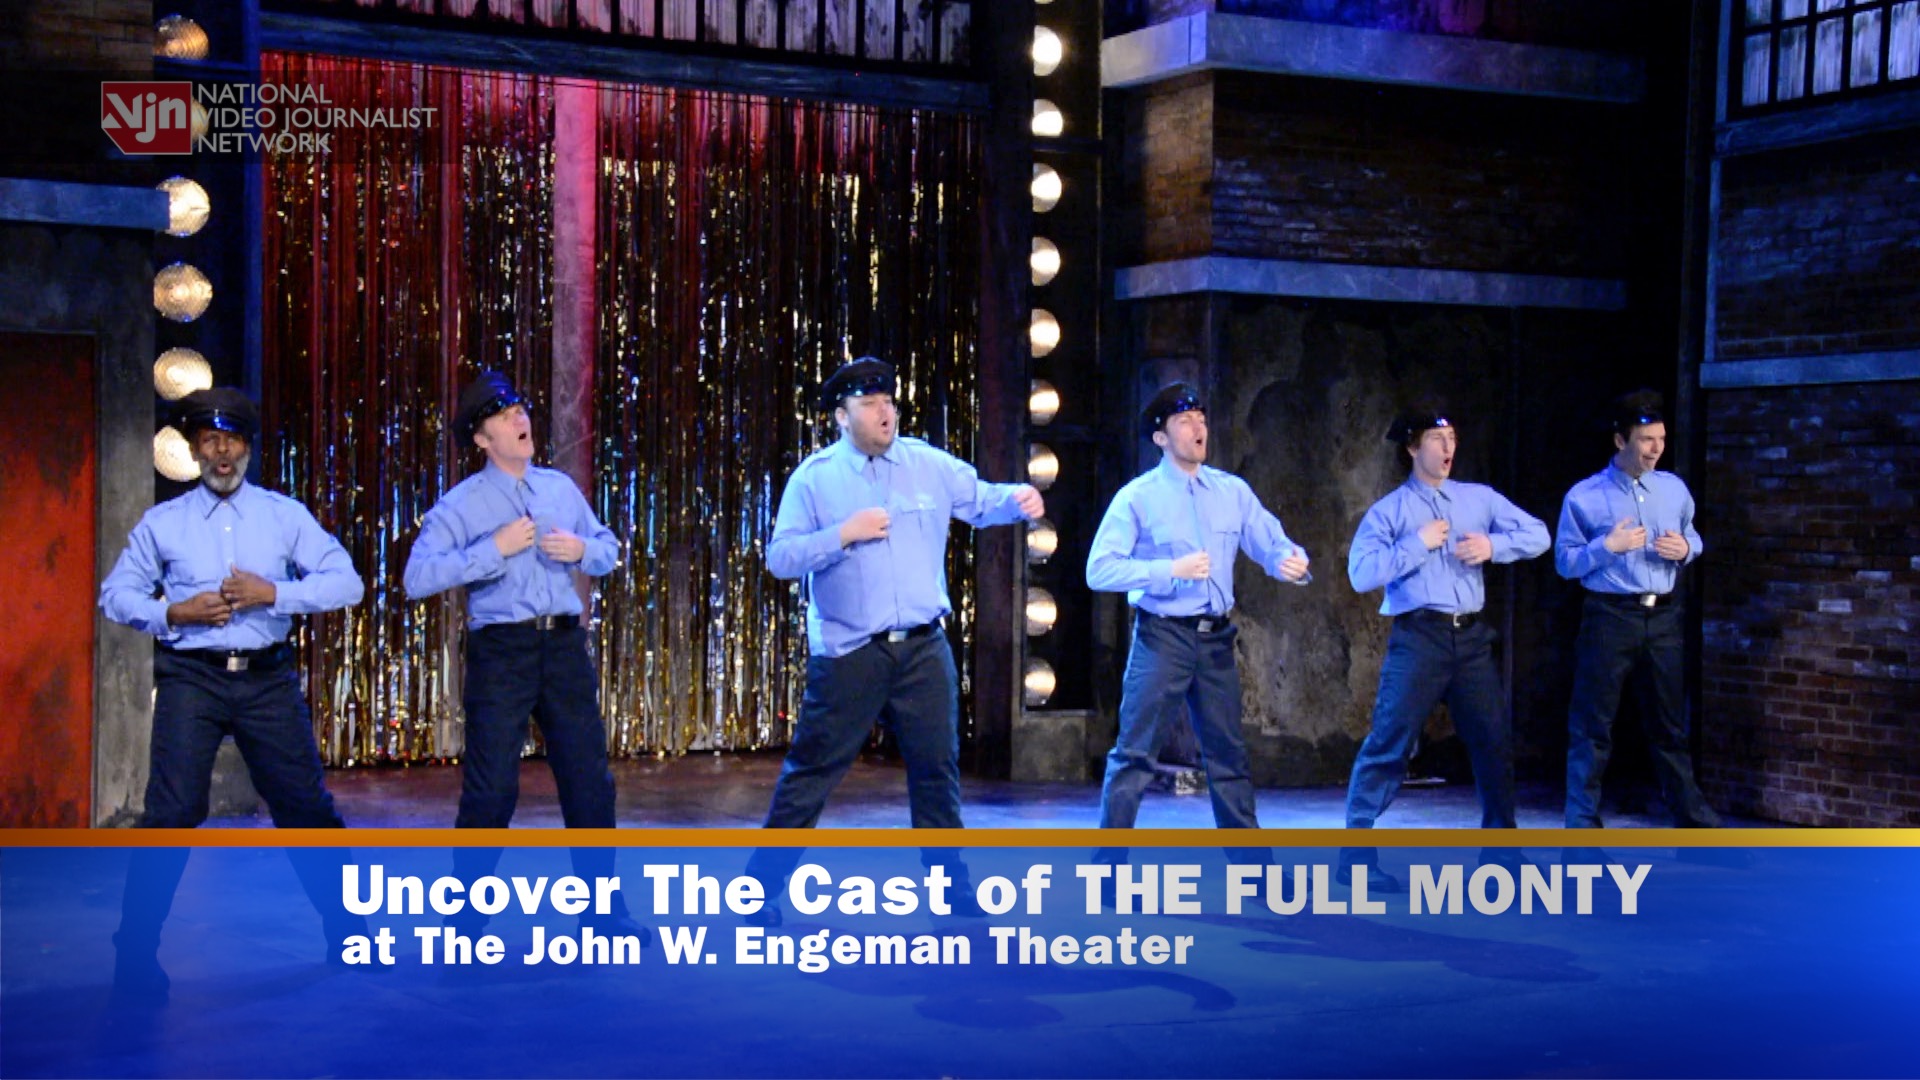 Meet the Cast of The Full Monty at The John W Engeman Theater in Northport